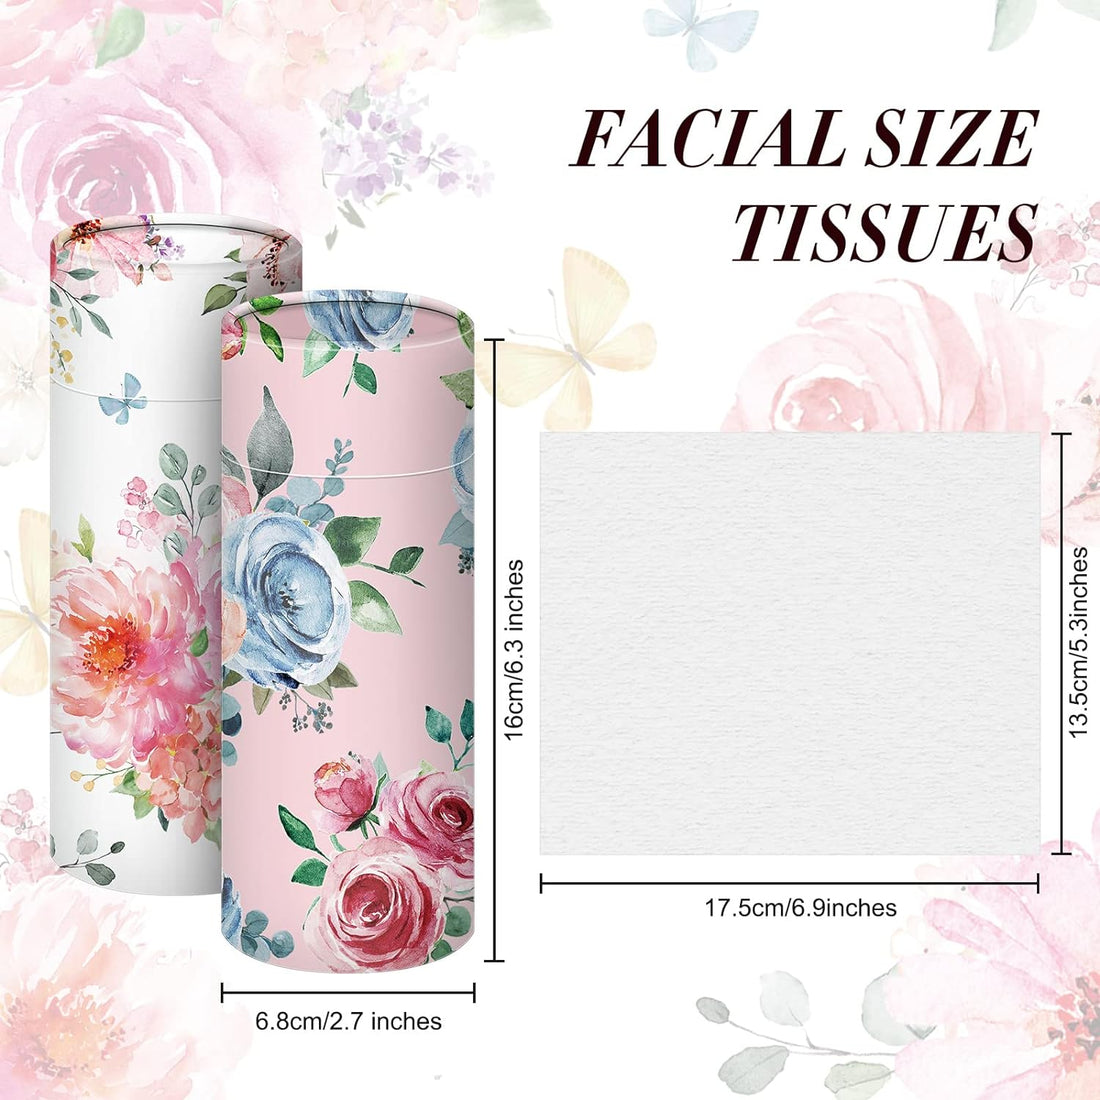 Ctosree 8 Pcs Car Tissue Cylinder with Facial Tissue Bulk Round Floral Car Tissue Holder Cylinder Tube Tissue Tubes Round Tissue Boxes for Car Travel Tissues Fit Car Cup Holder Round Container